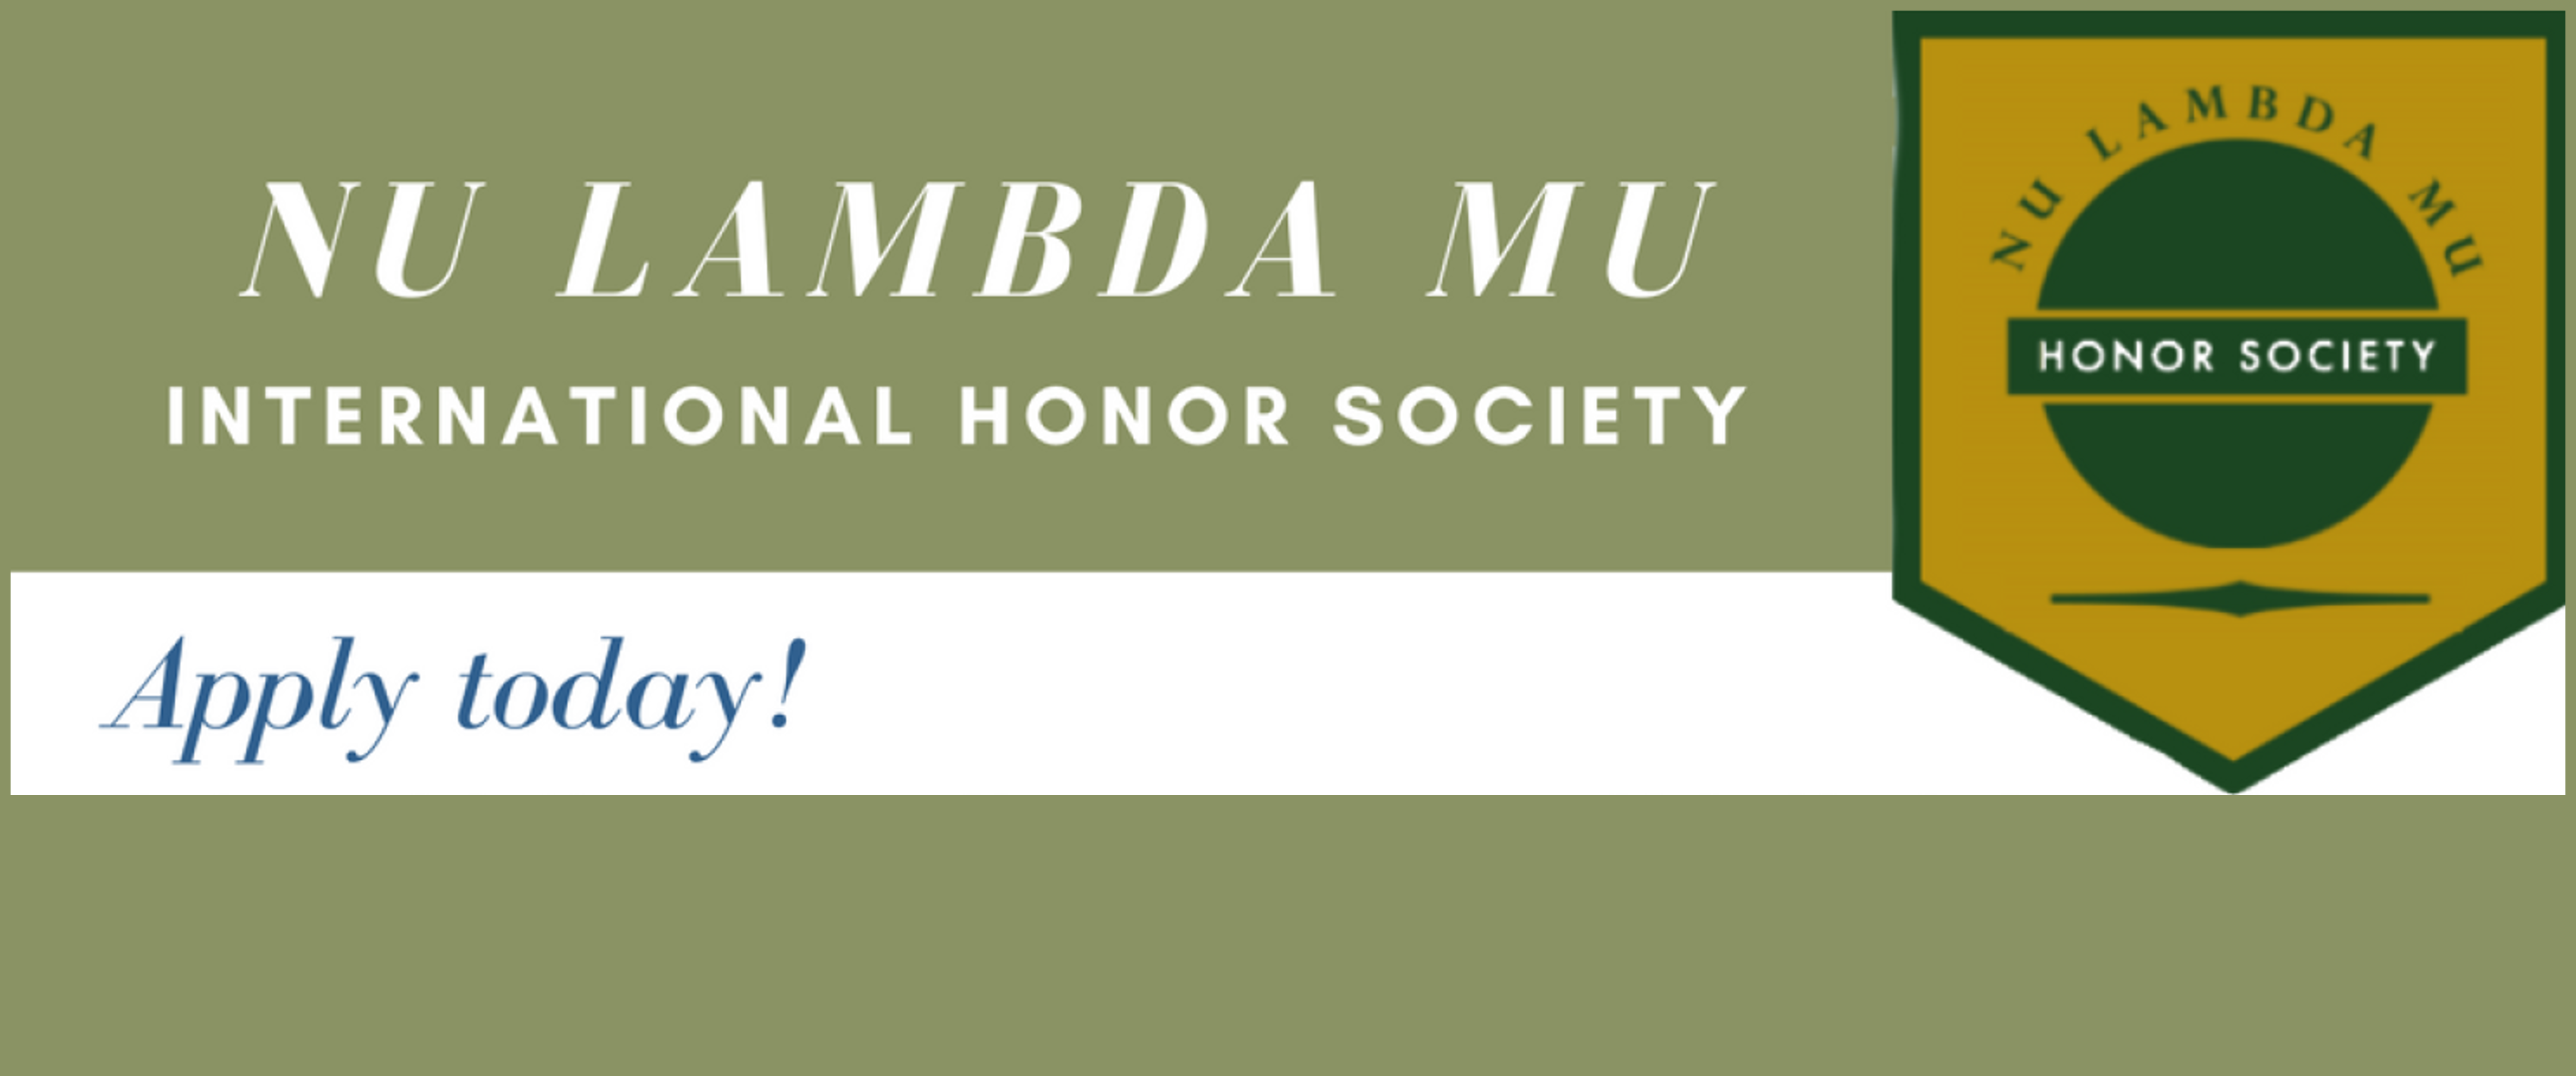 Applications for the Nu Lambda Mu international honor society are being accepted until April 21